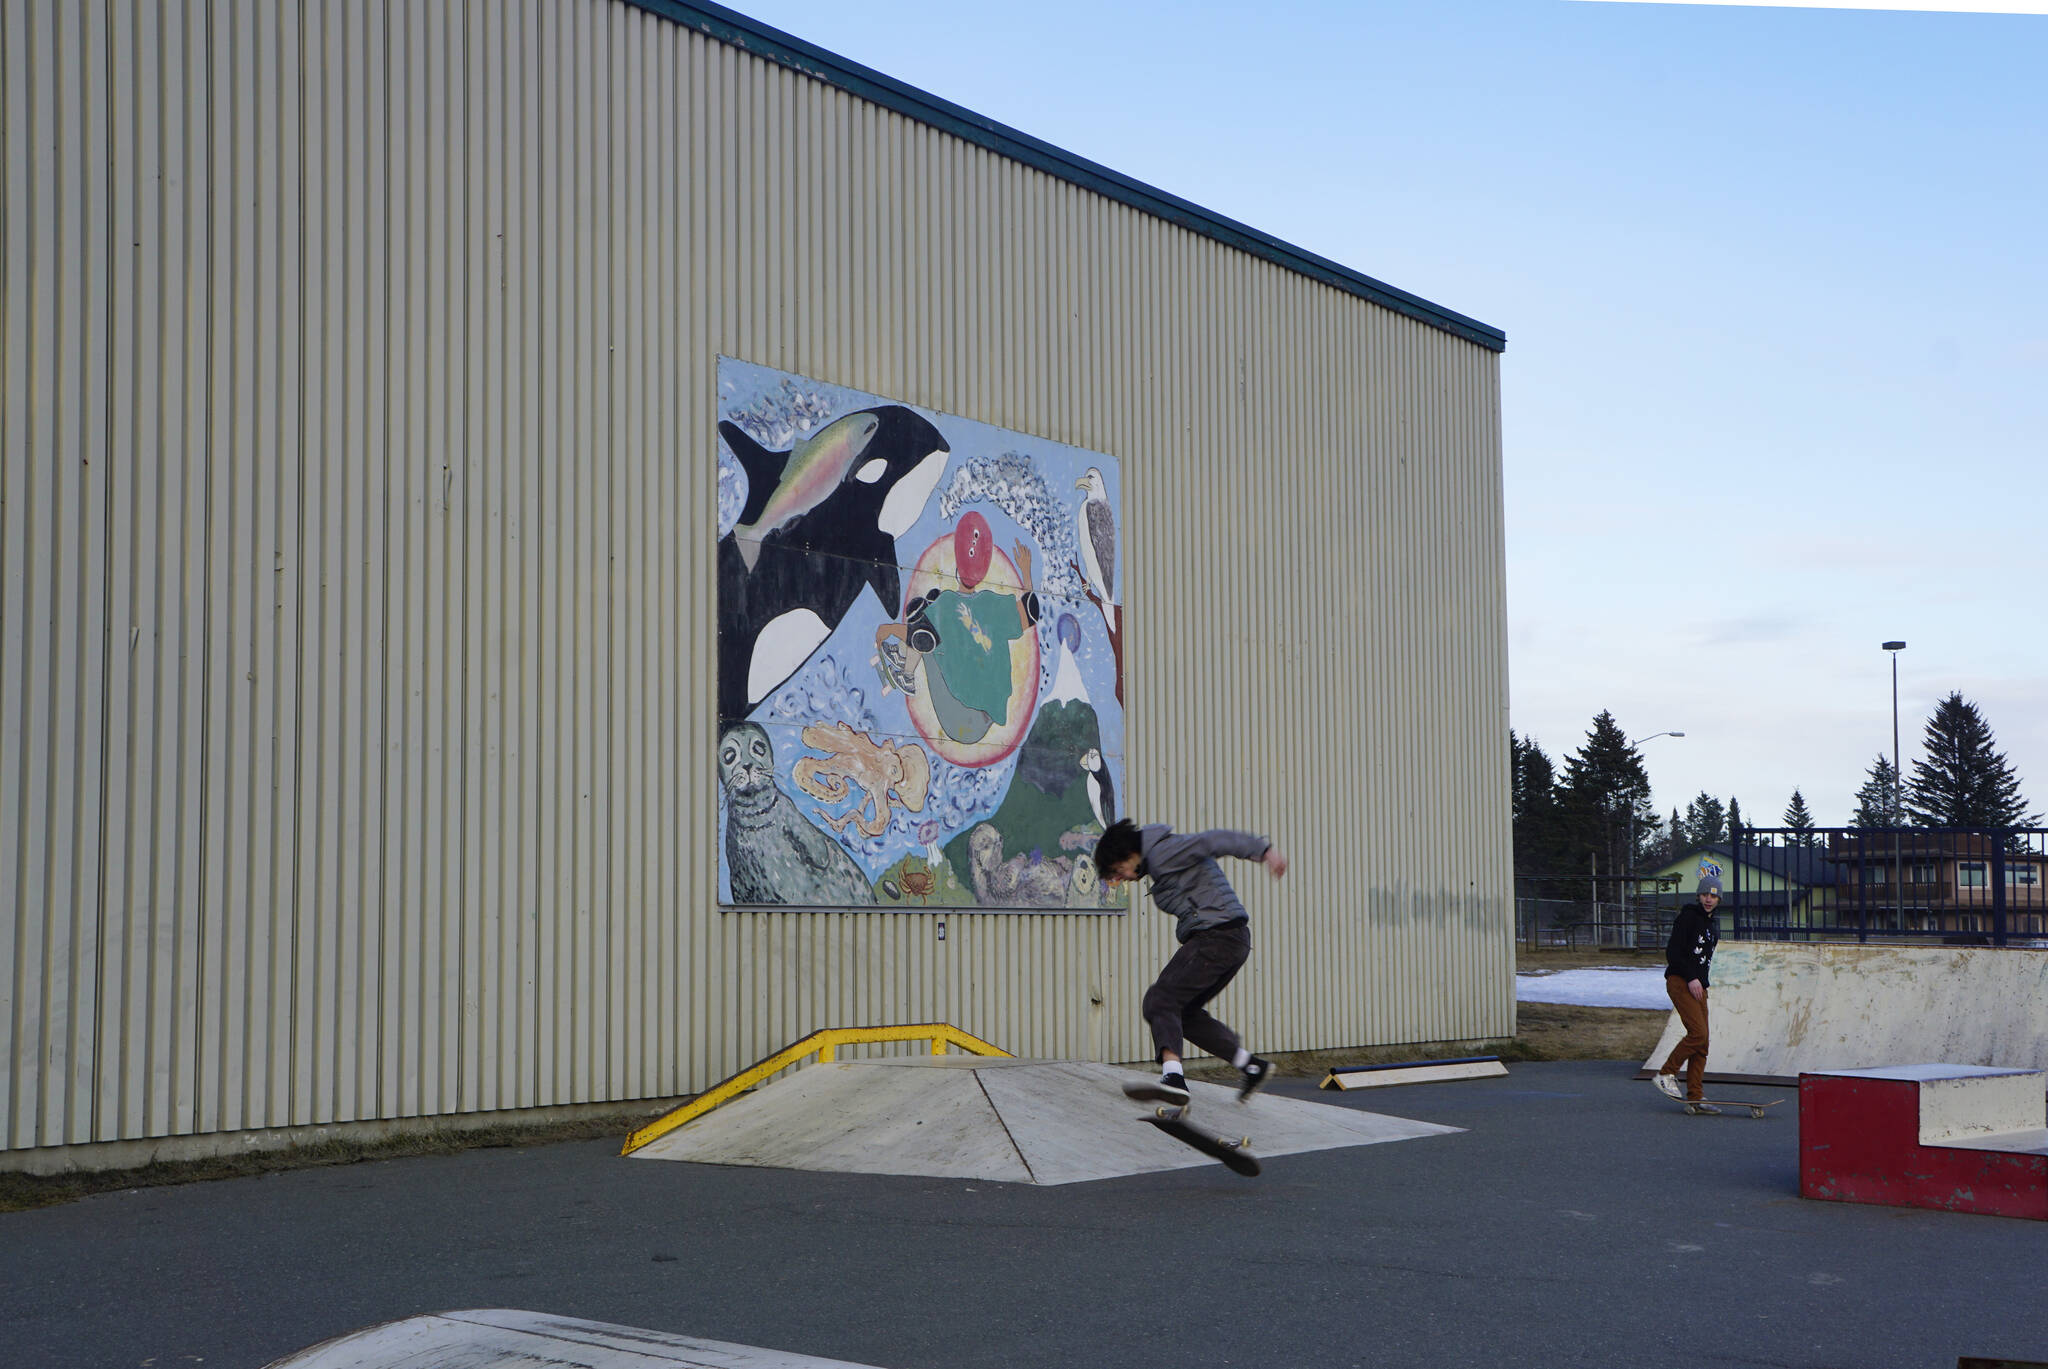 A group of young people try out the thawed skate park on Monday, Feb. 28, 2022, at the Homer Education and Recreation Complex in Homer, Alaska. The Homer City Council met Monday and heard a report by Stantec staff on a proposed design for a new community center to go on the HERC site. The design includes a skate park. (Photo by Michael Armstrong/Homer News)